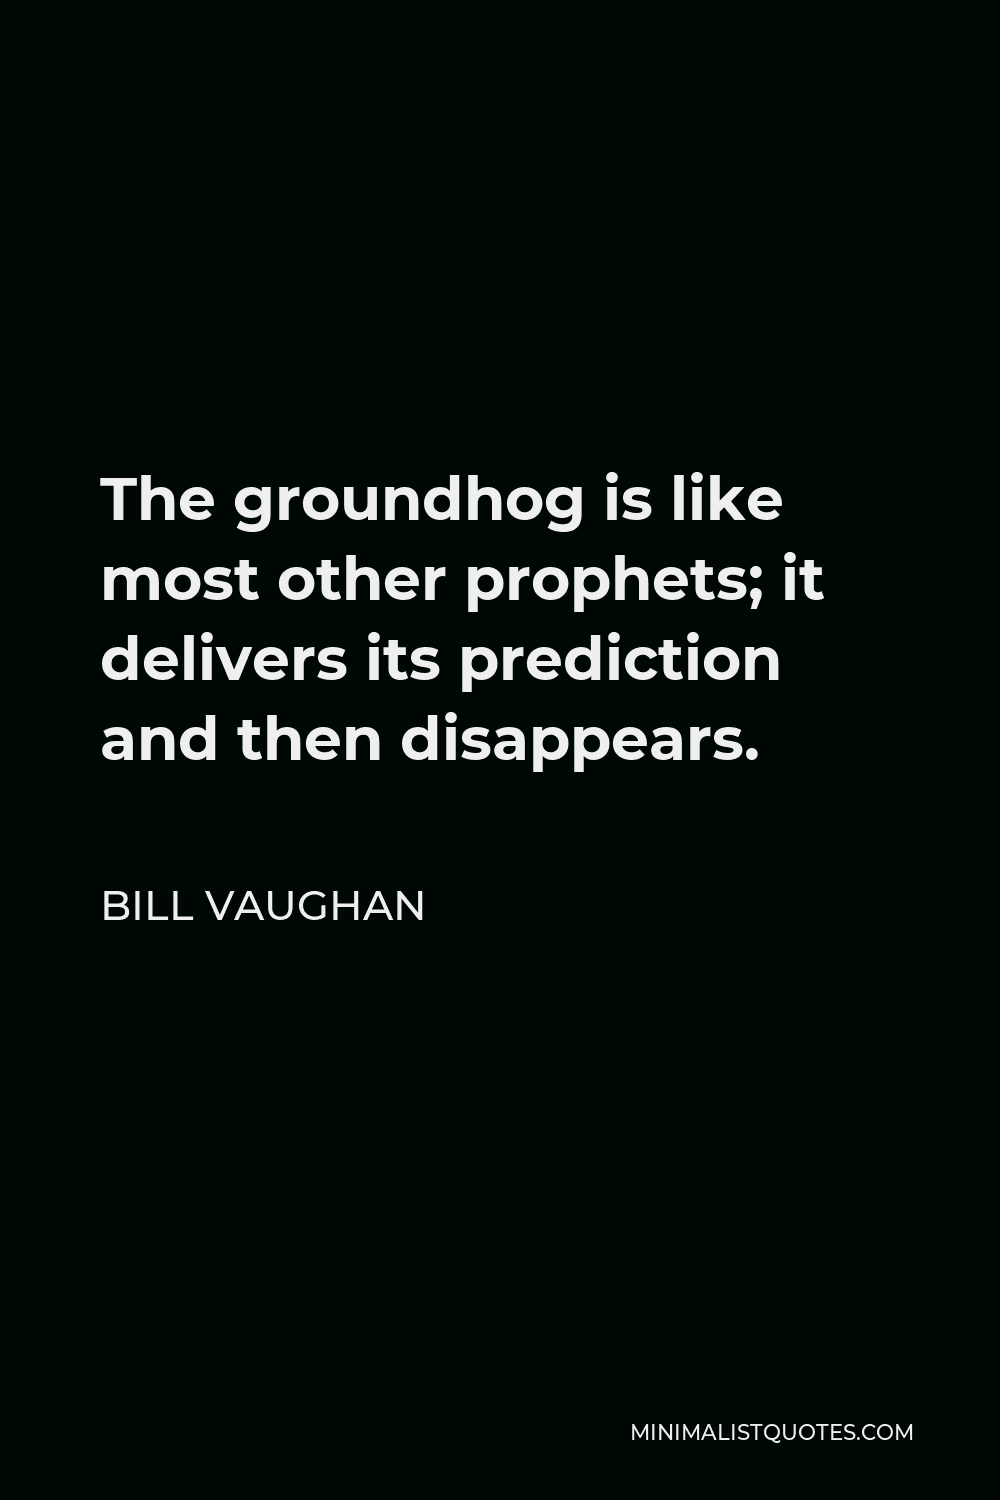 Bill Vaughan Quote - The groundhog is like most other prophets; it delivers its prediction and then disappears.